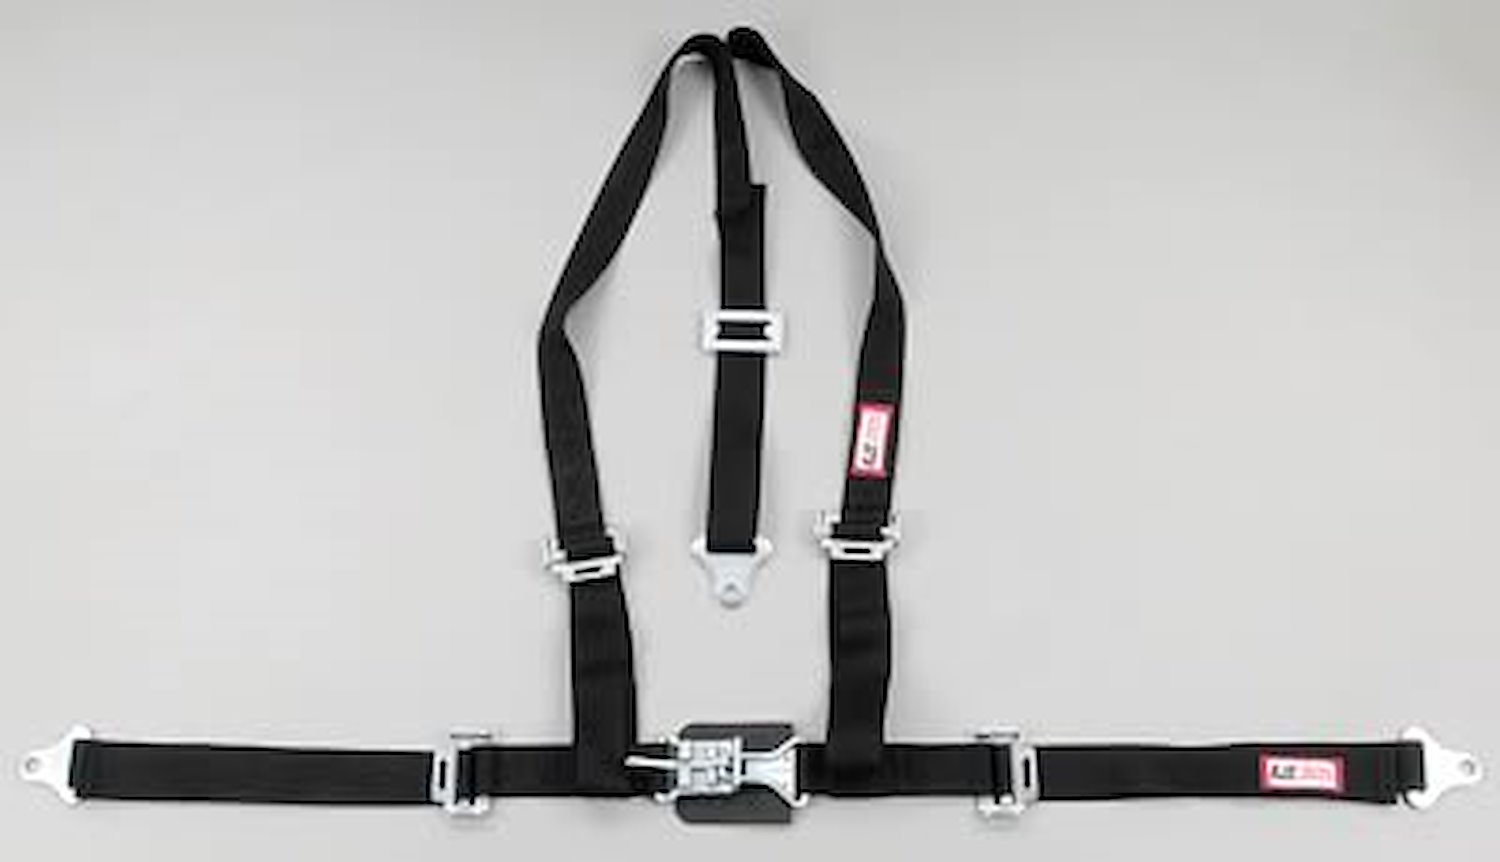 NON-SFI L&L HARNESS 3 PULL UP Lap Belt SEWN IN 2 S.H. Individual FLOOR Mount ALL WRAP ENDS ORANGE